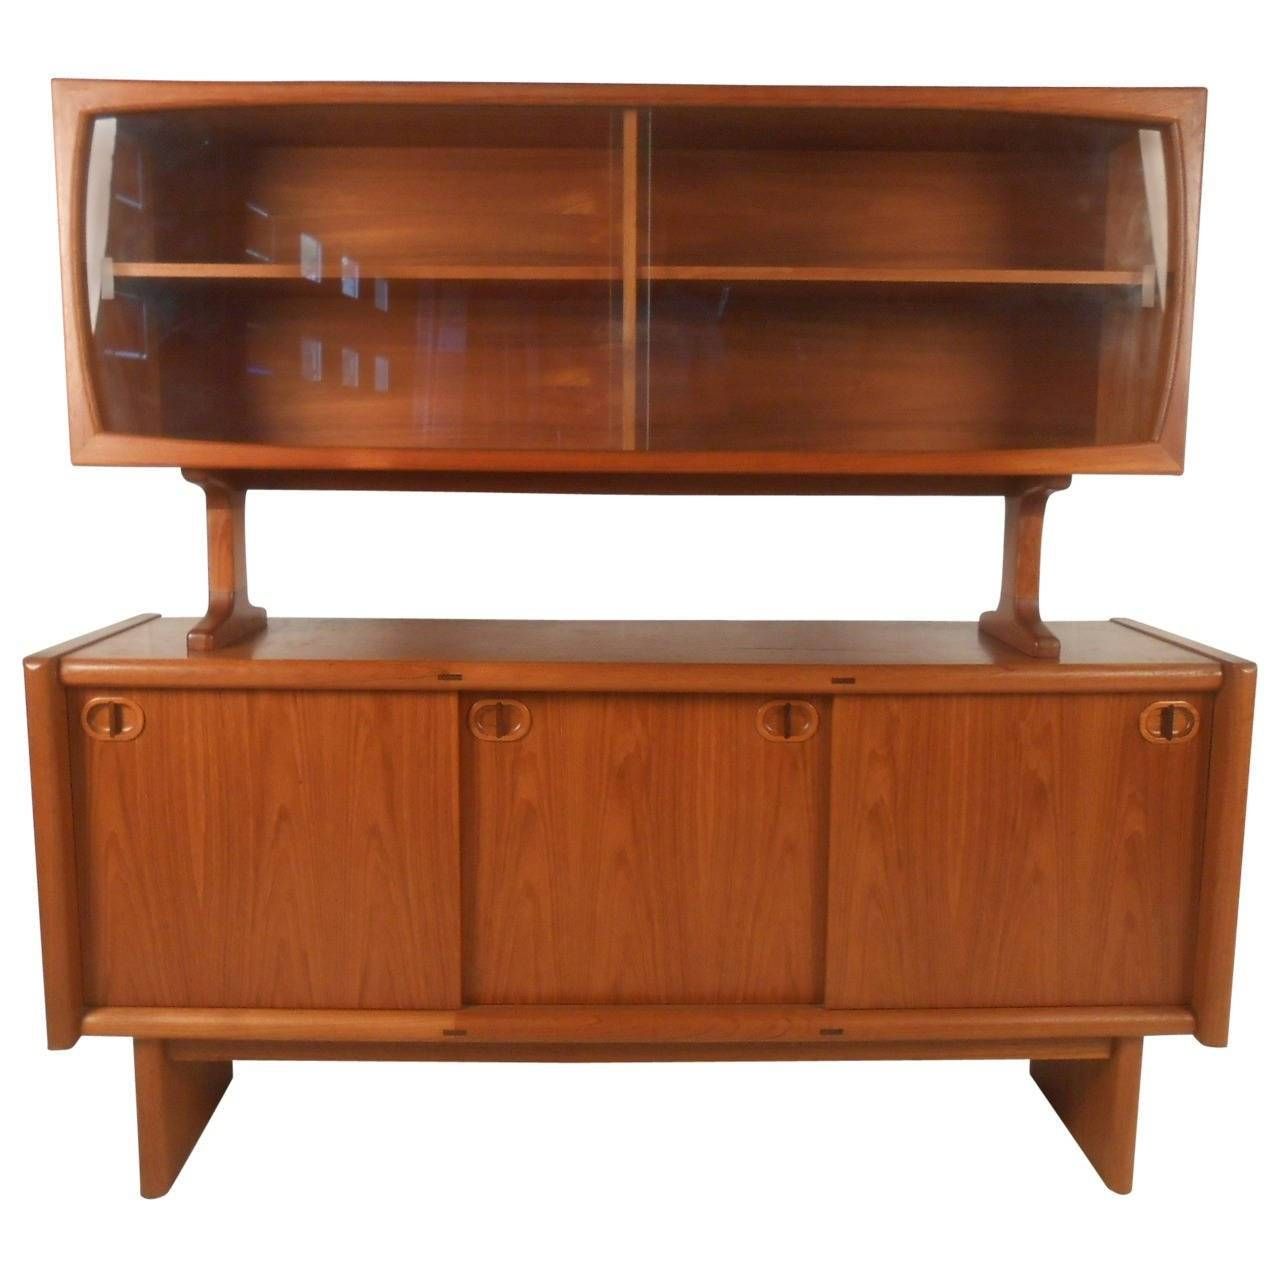 Midcentury Style Danish Teak Sideboard With Display Topper For Within Teak Sideboards (View 11 of 15)